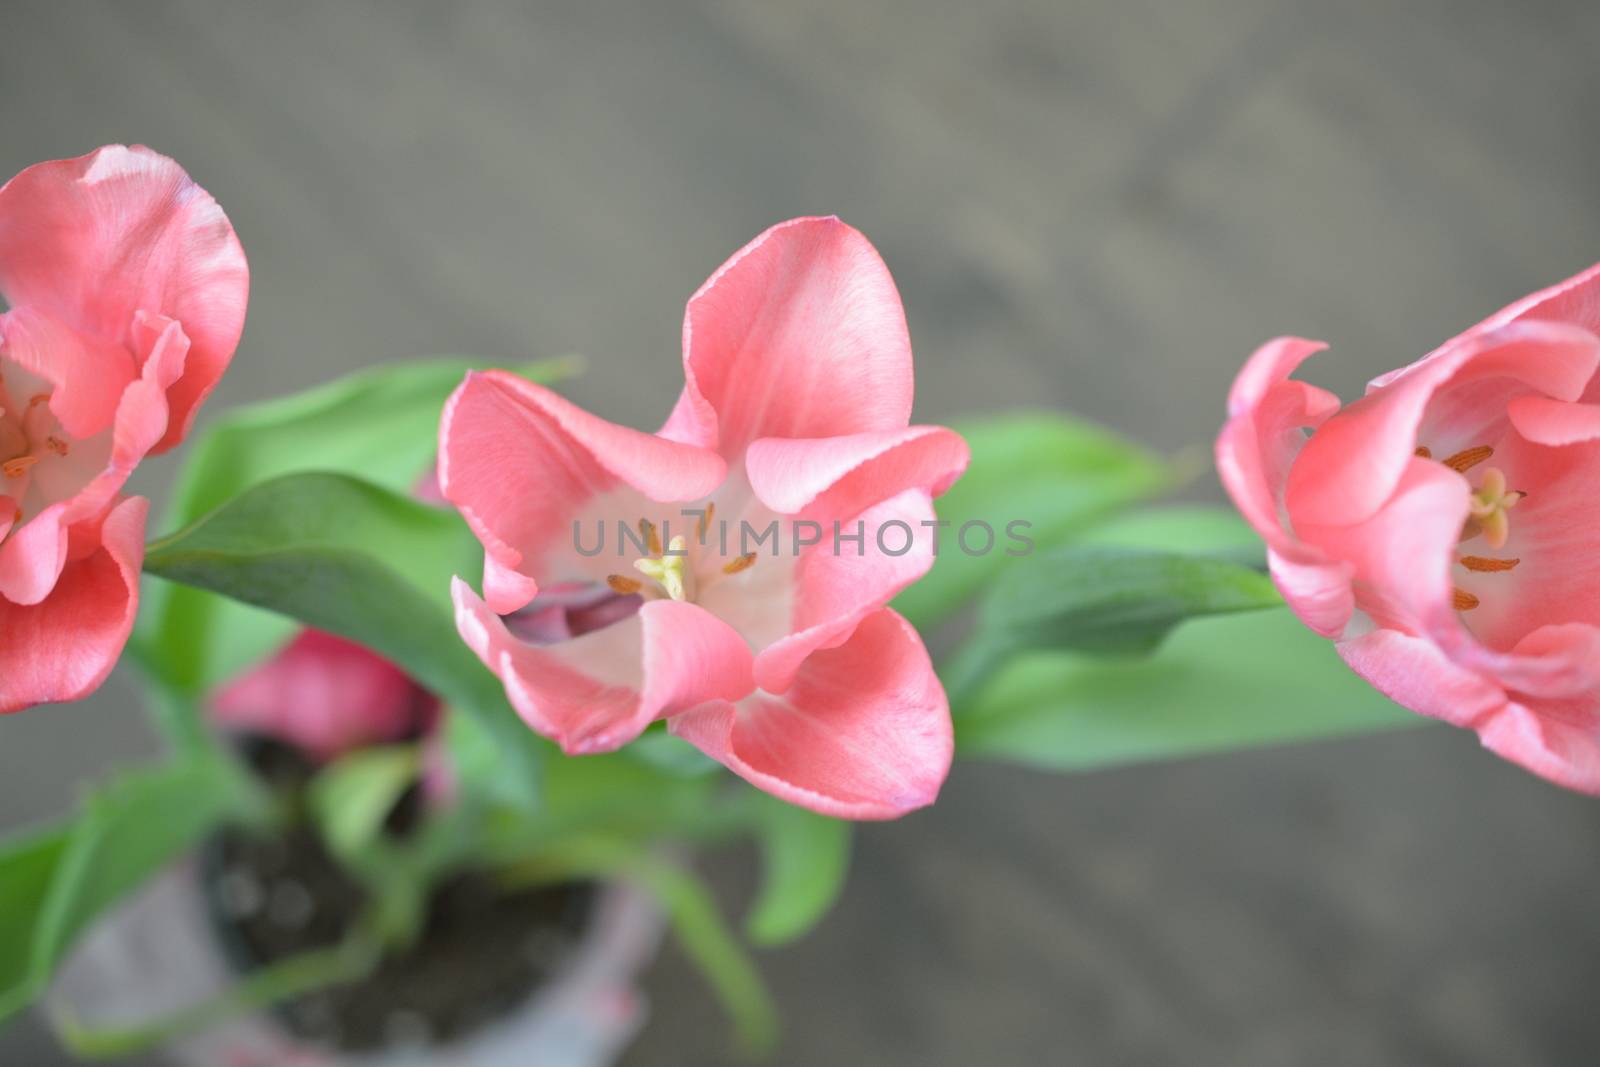 Three pink tulips shown up close